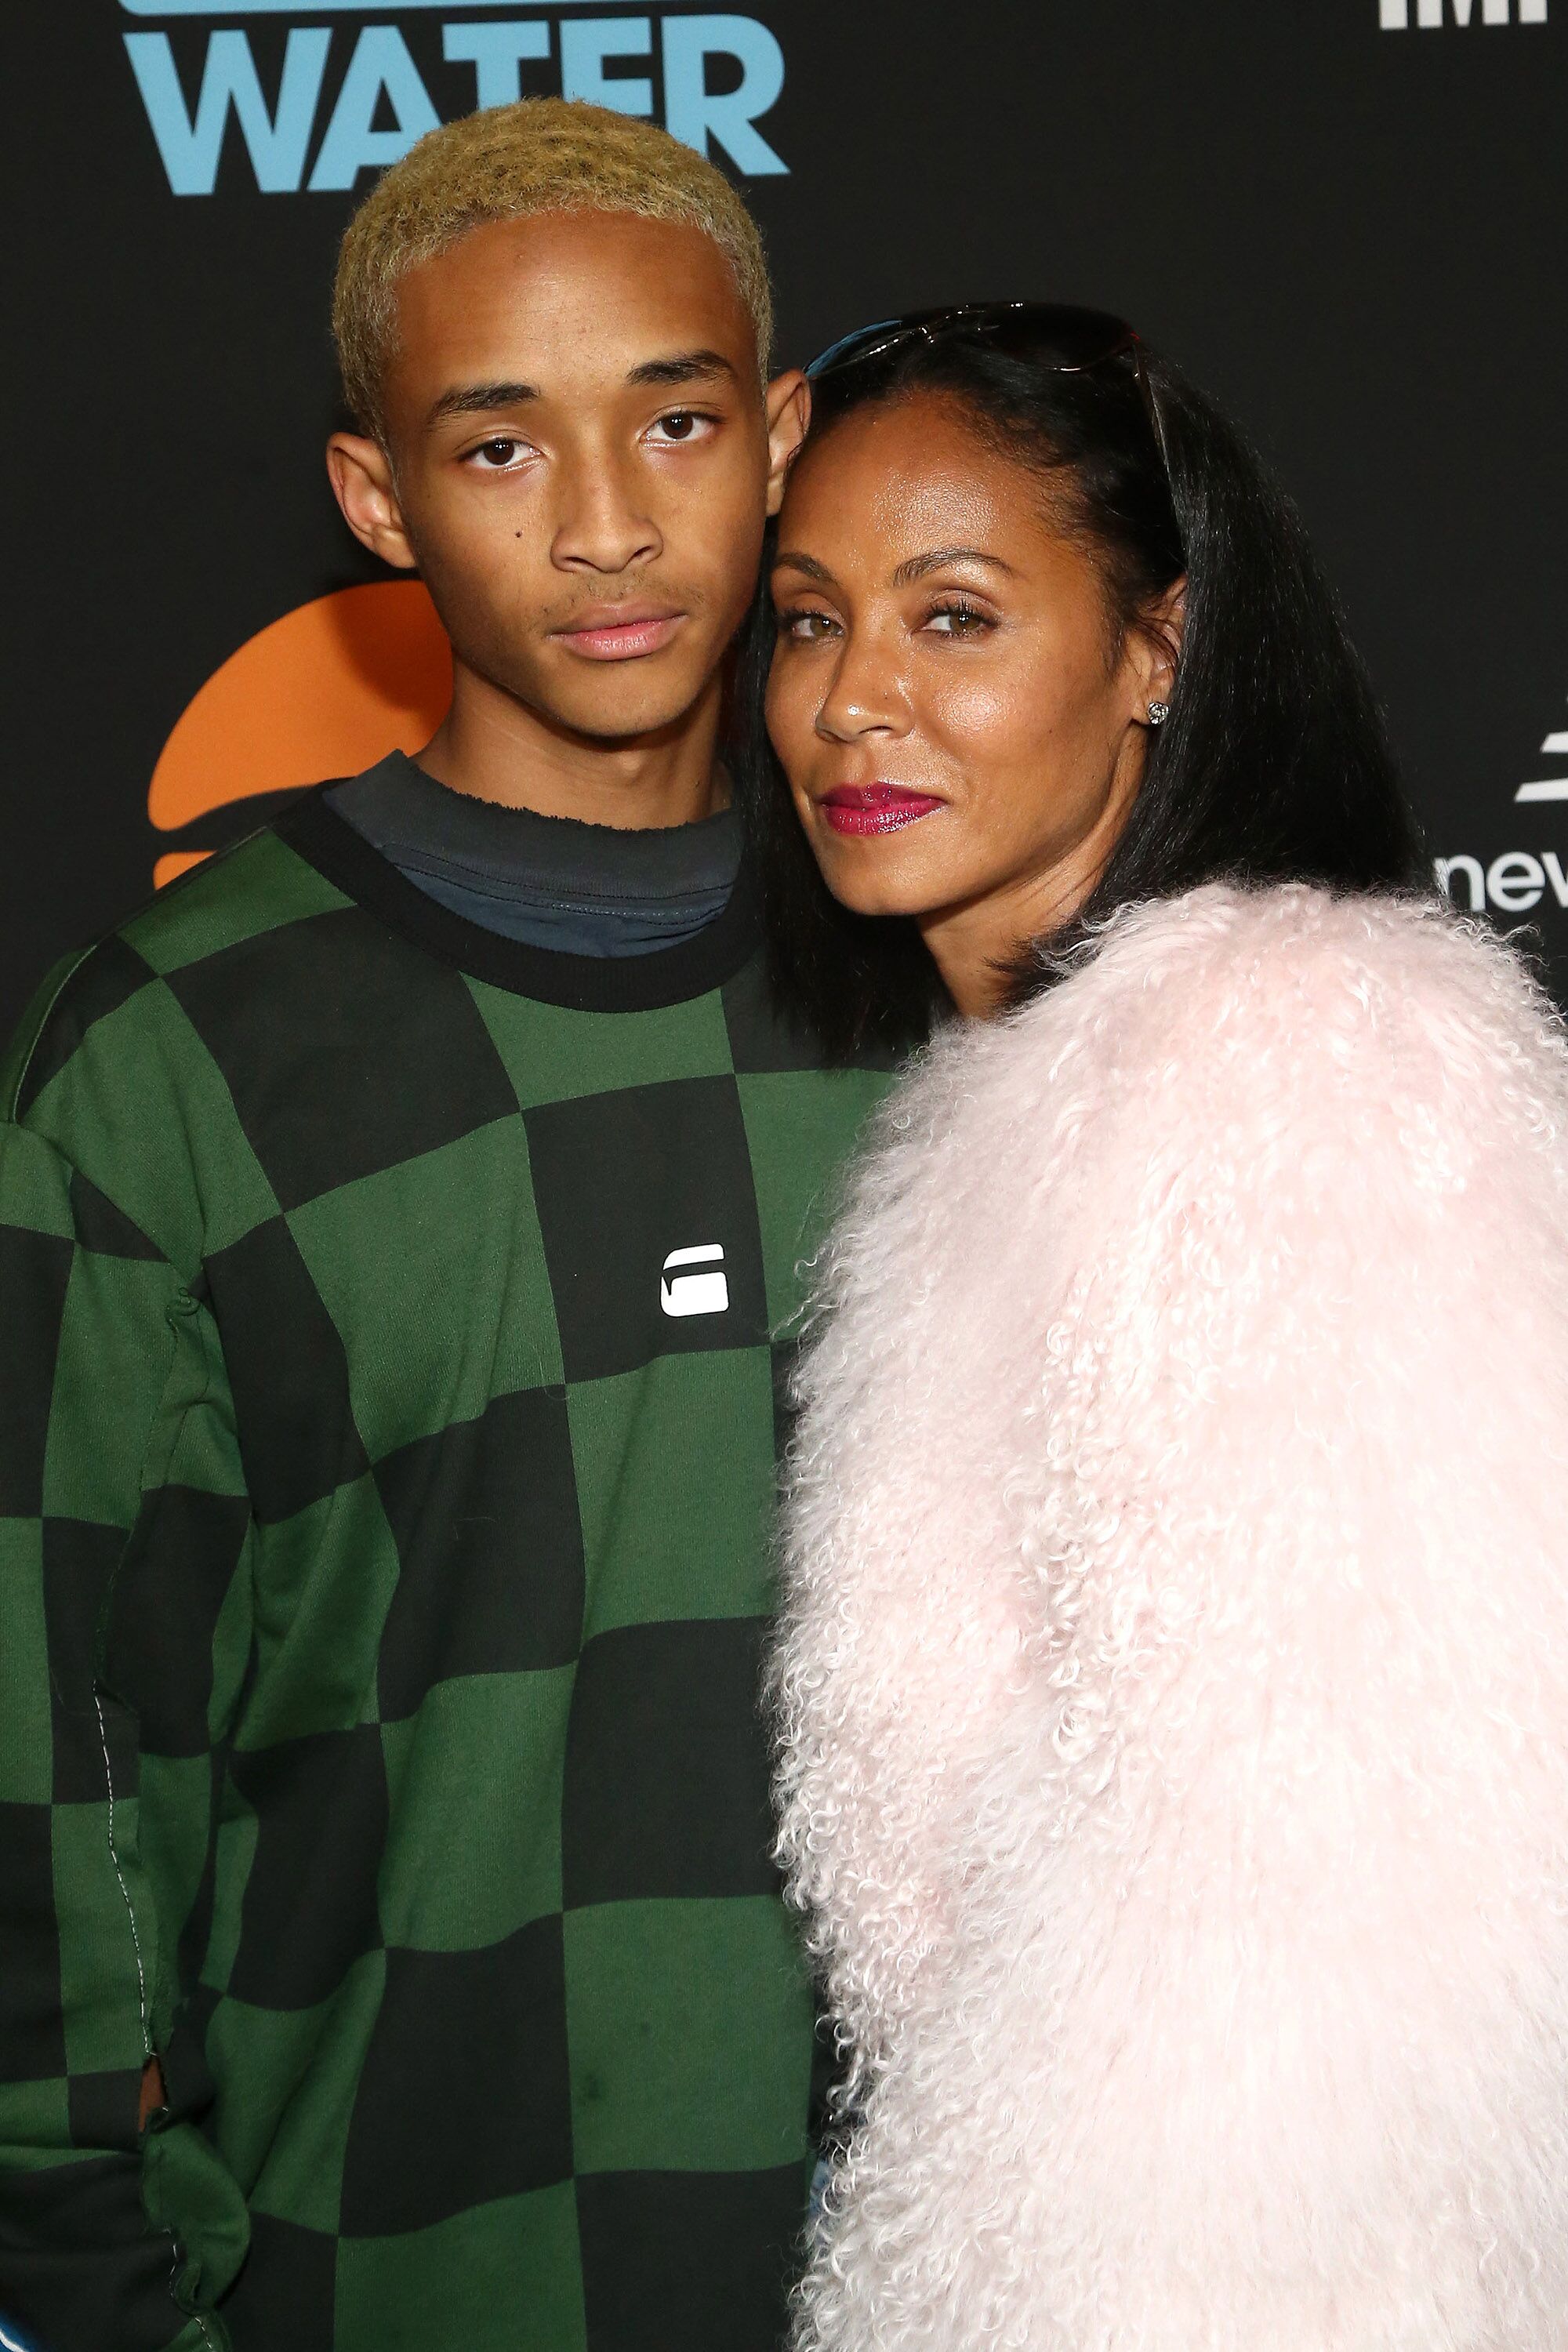 Jaden Smith and his mother Jada Pinkett Smith at a Just Water event in 2019/ Source; Gertty Images